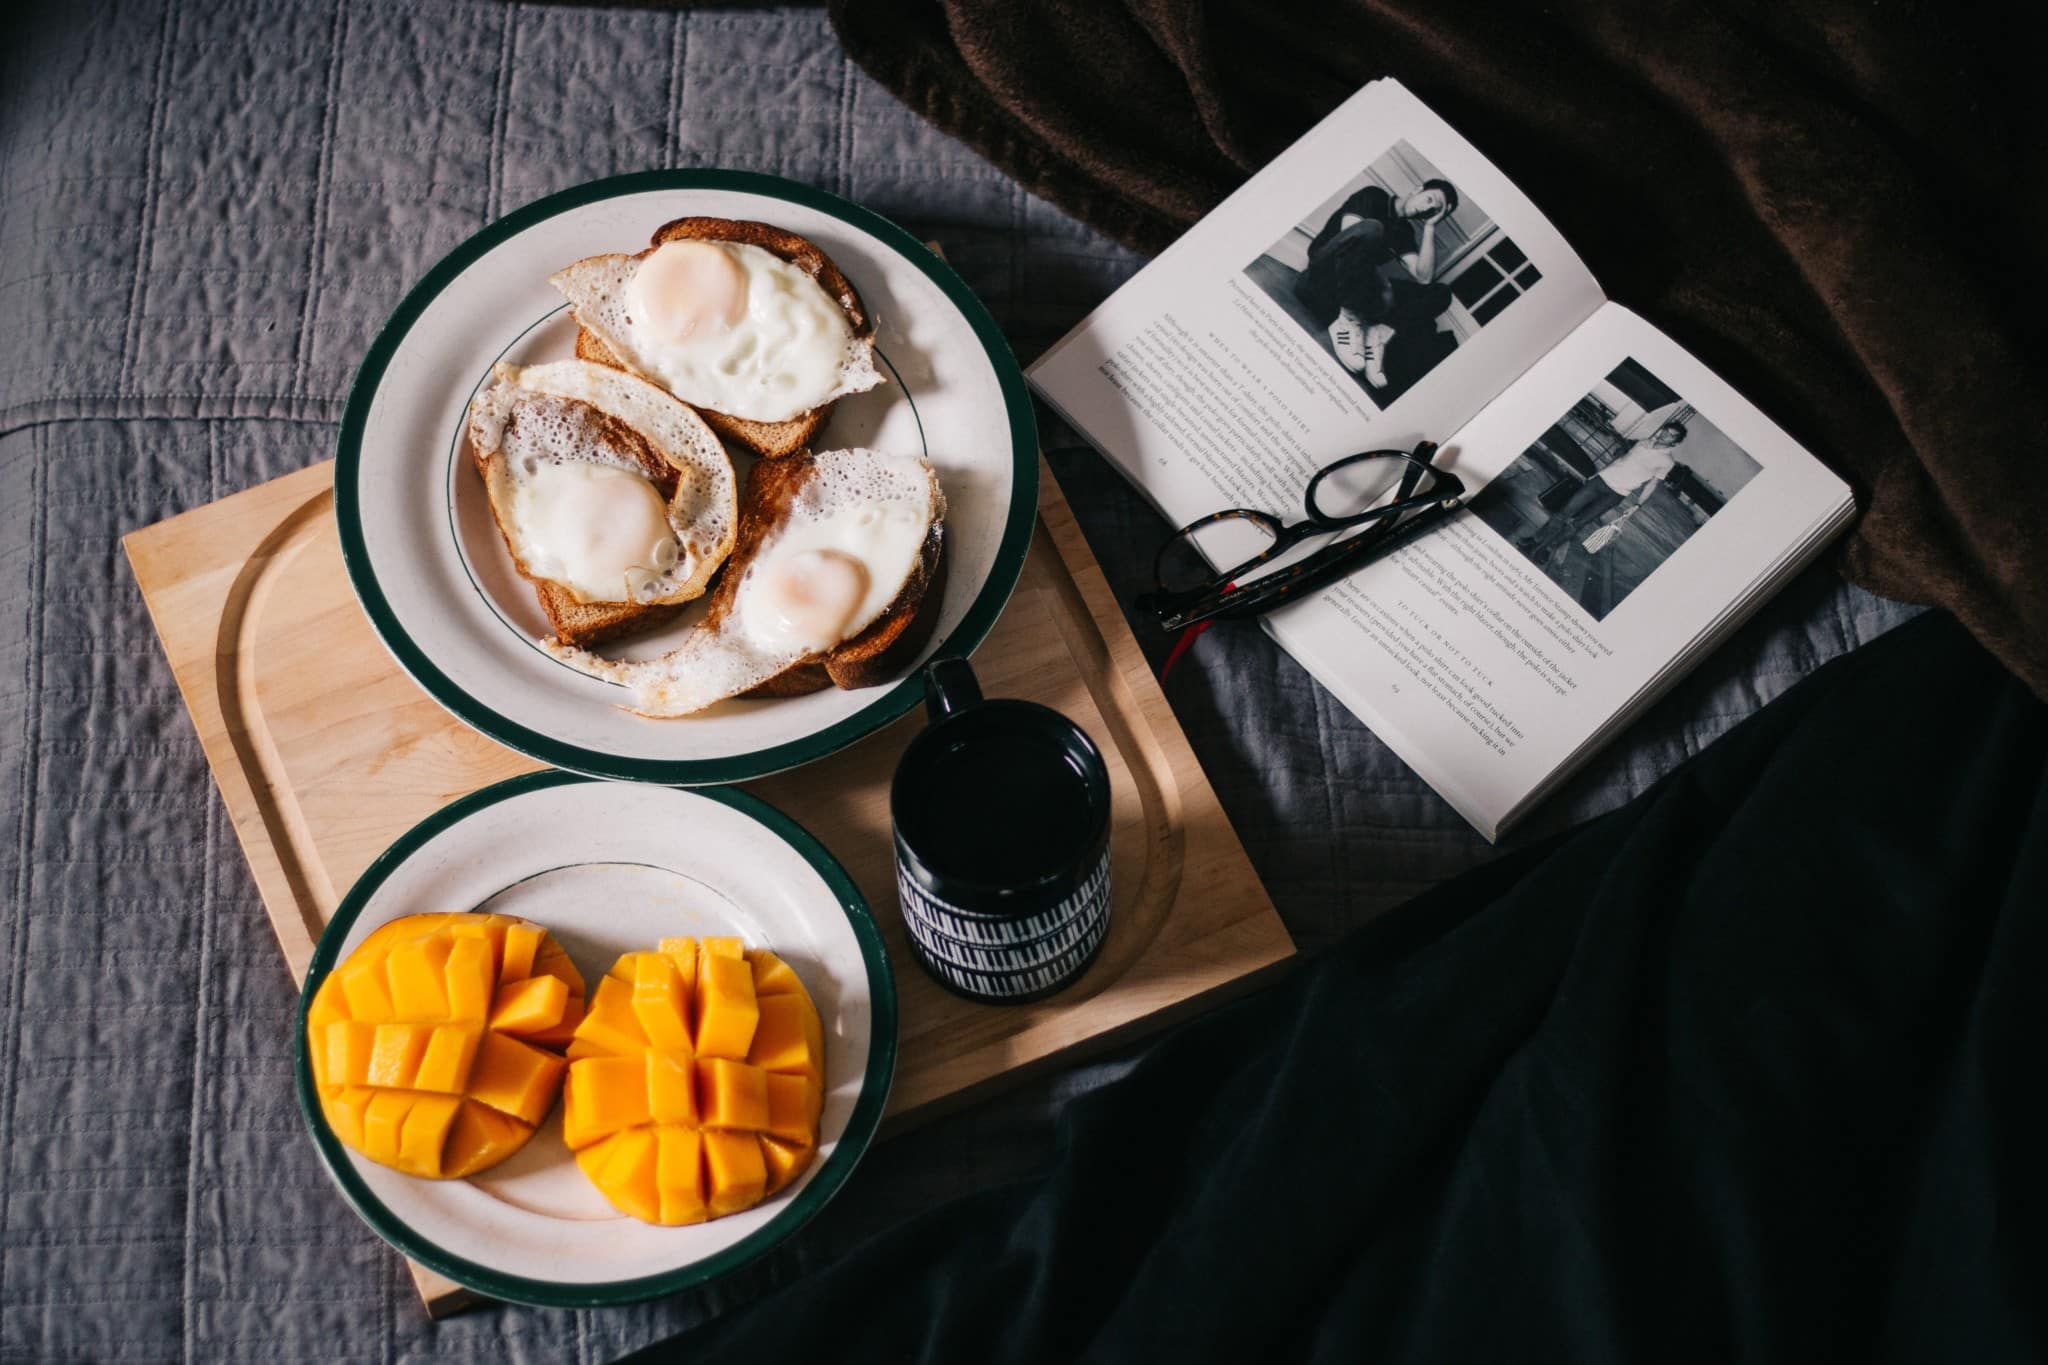 sliced mangos, eggs, and bread on bed